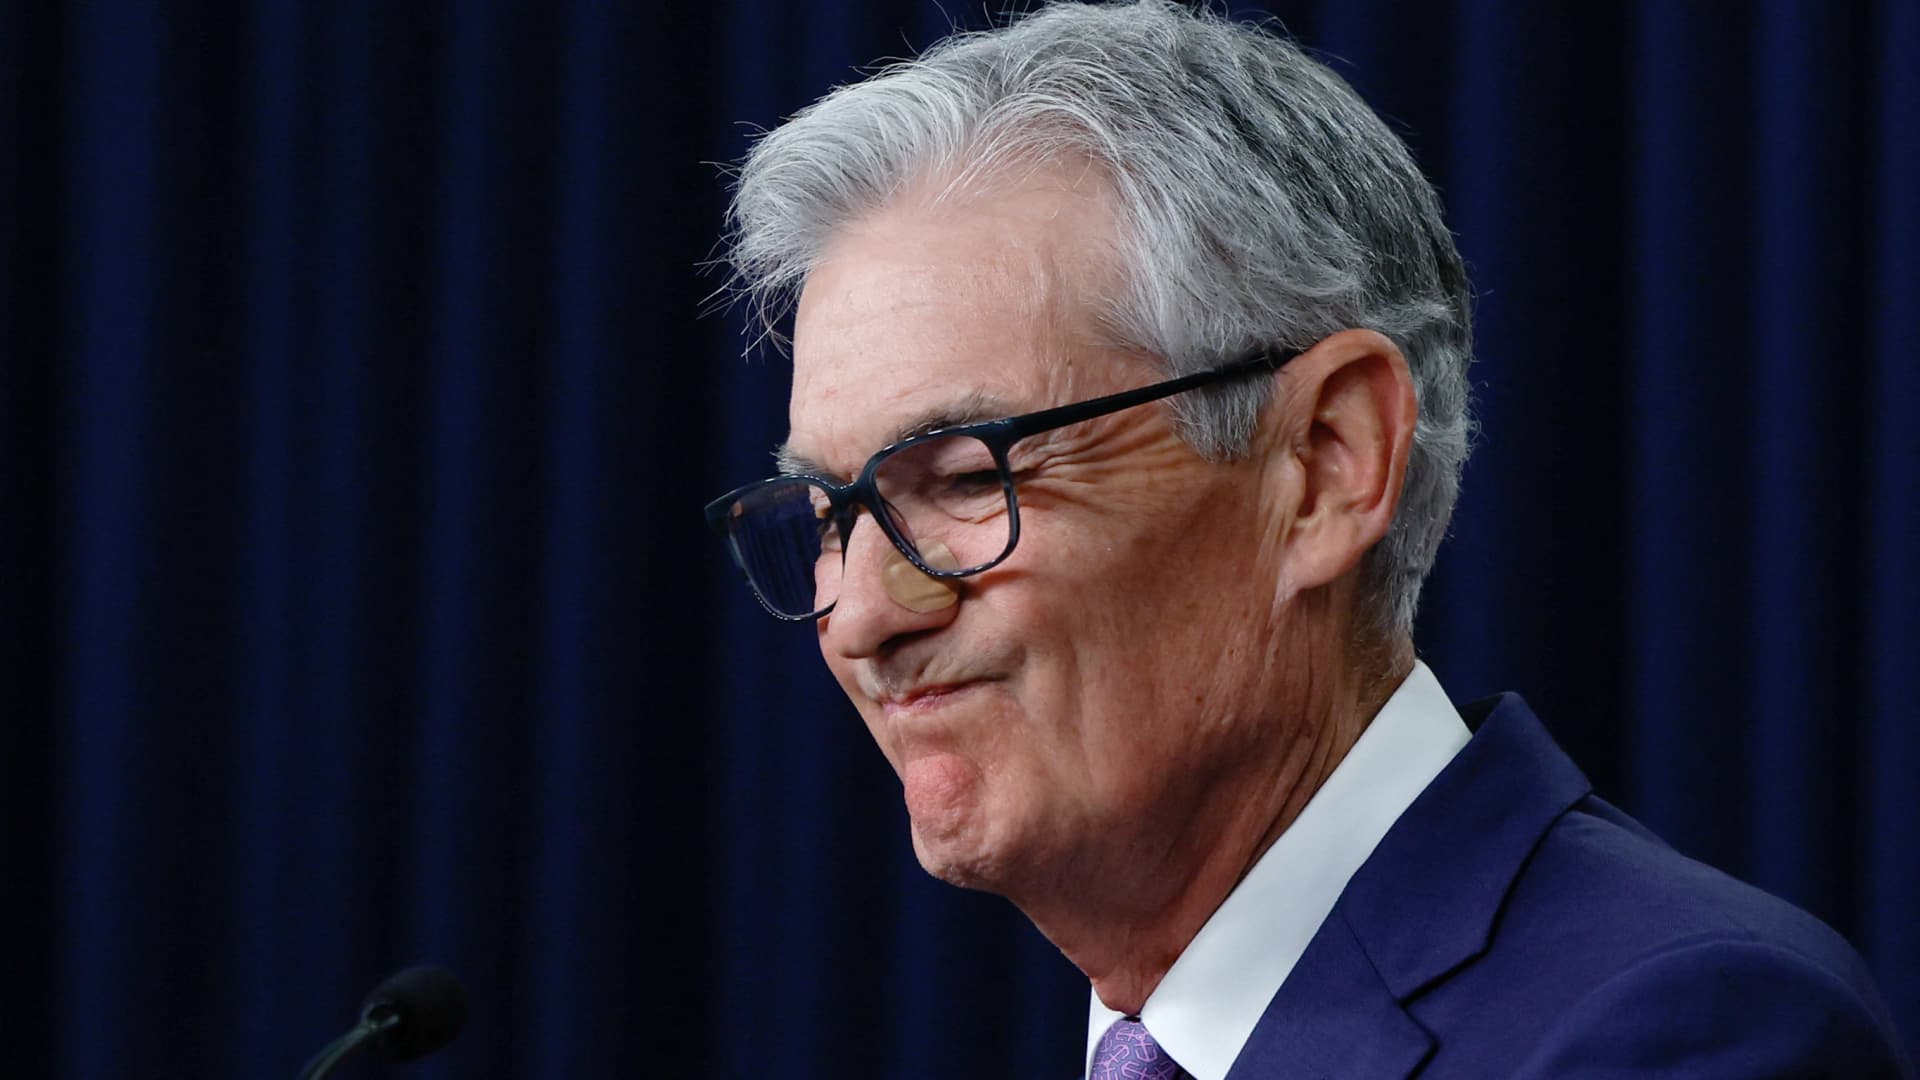 Economist Sahm, who created the recession rule, says the Fed is 'playing with fire'